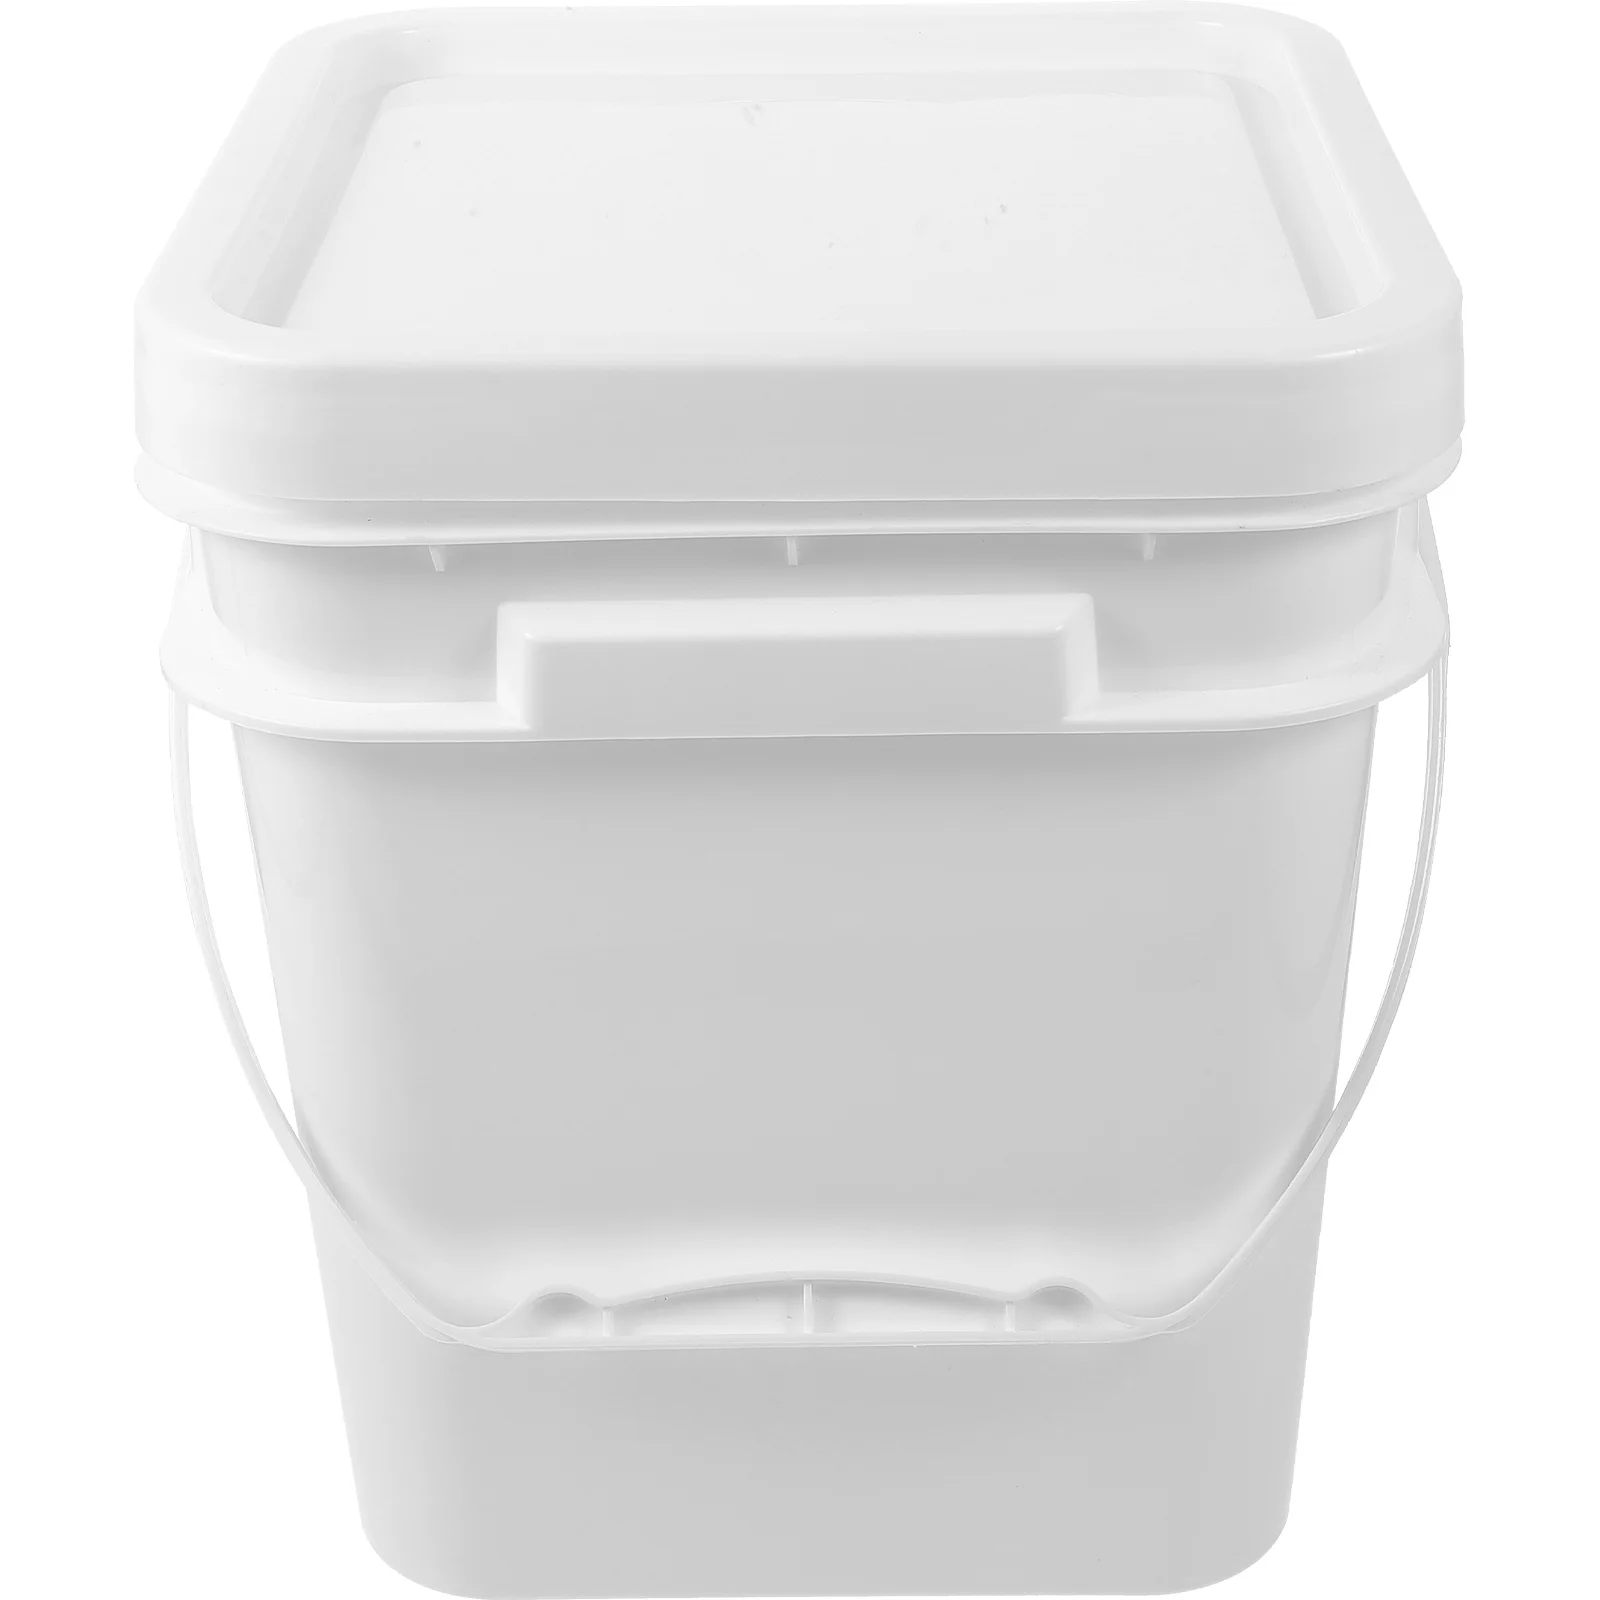 

Paint Plastic Bin Bucket Food Containers Keg Lid Square Buckets Painting Pp Favor Lids